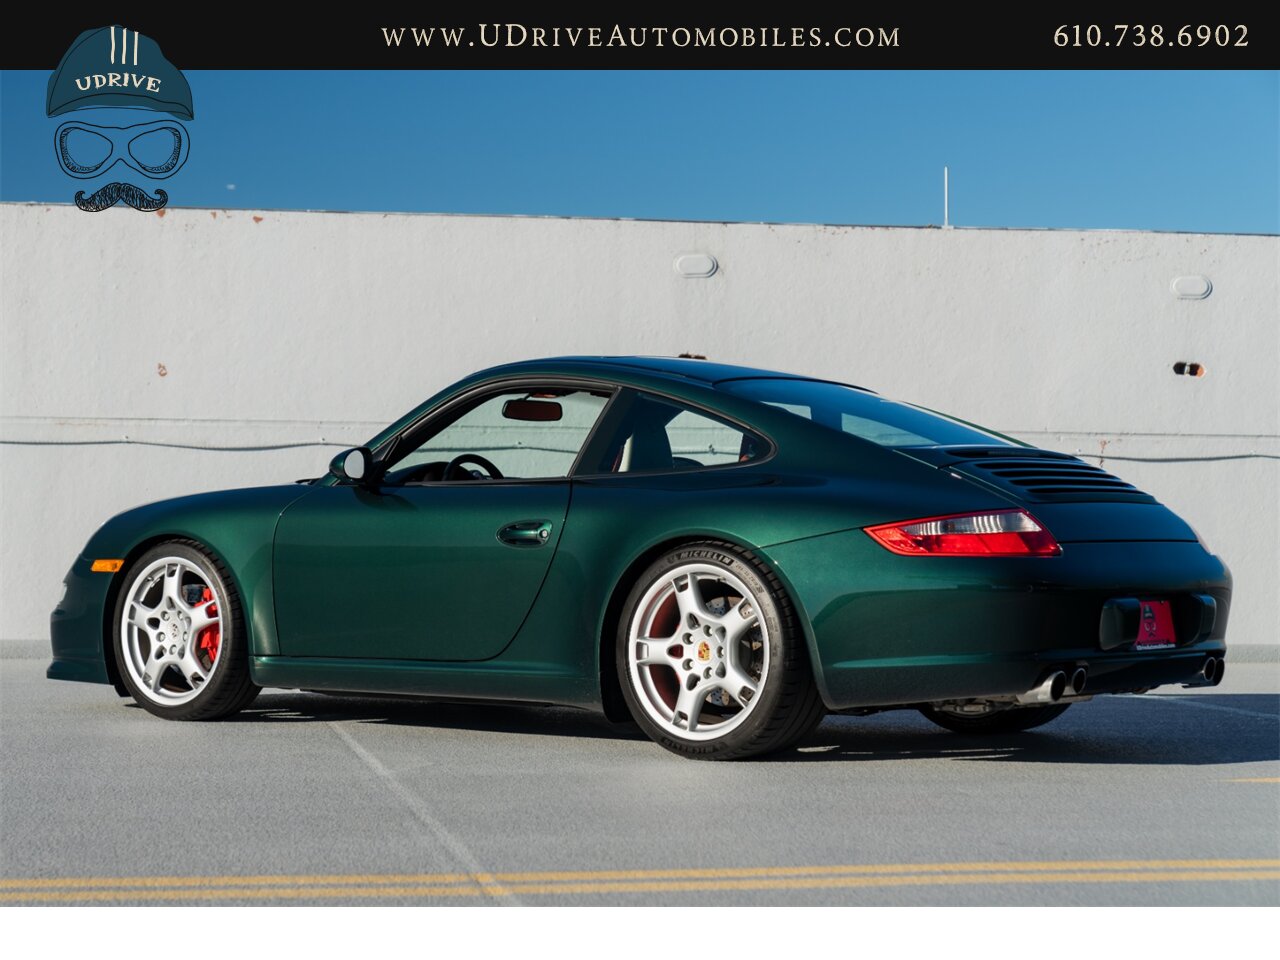 2007 Porsche 911 Carrera S 6Spd 997S RARE X51 Power Kit 381hp  1 of a Kind Forest Green over Blk/Terracotta Chrono Adap Sport Sts $113k MSRP - Photo 24 - West Chester, PA 19382